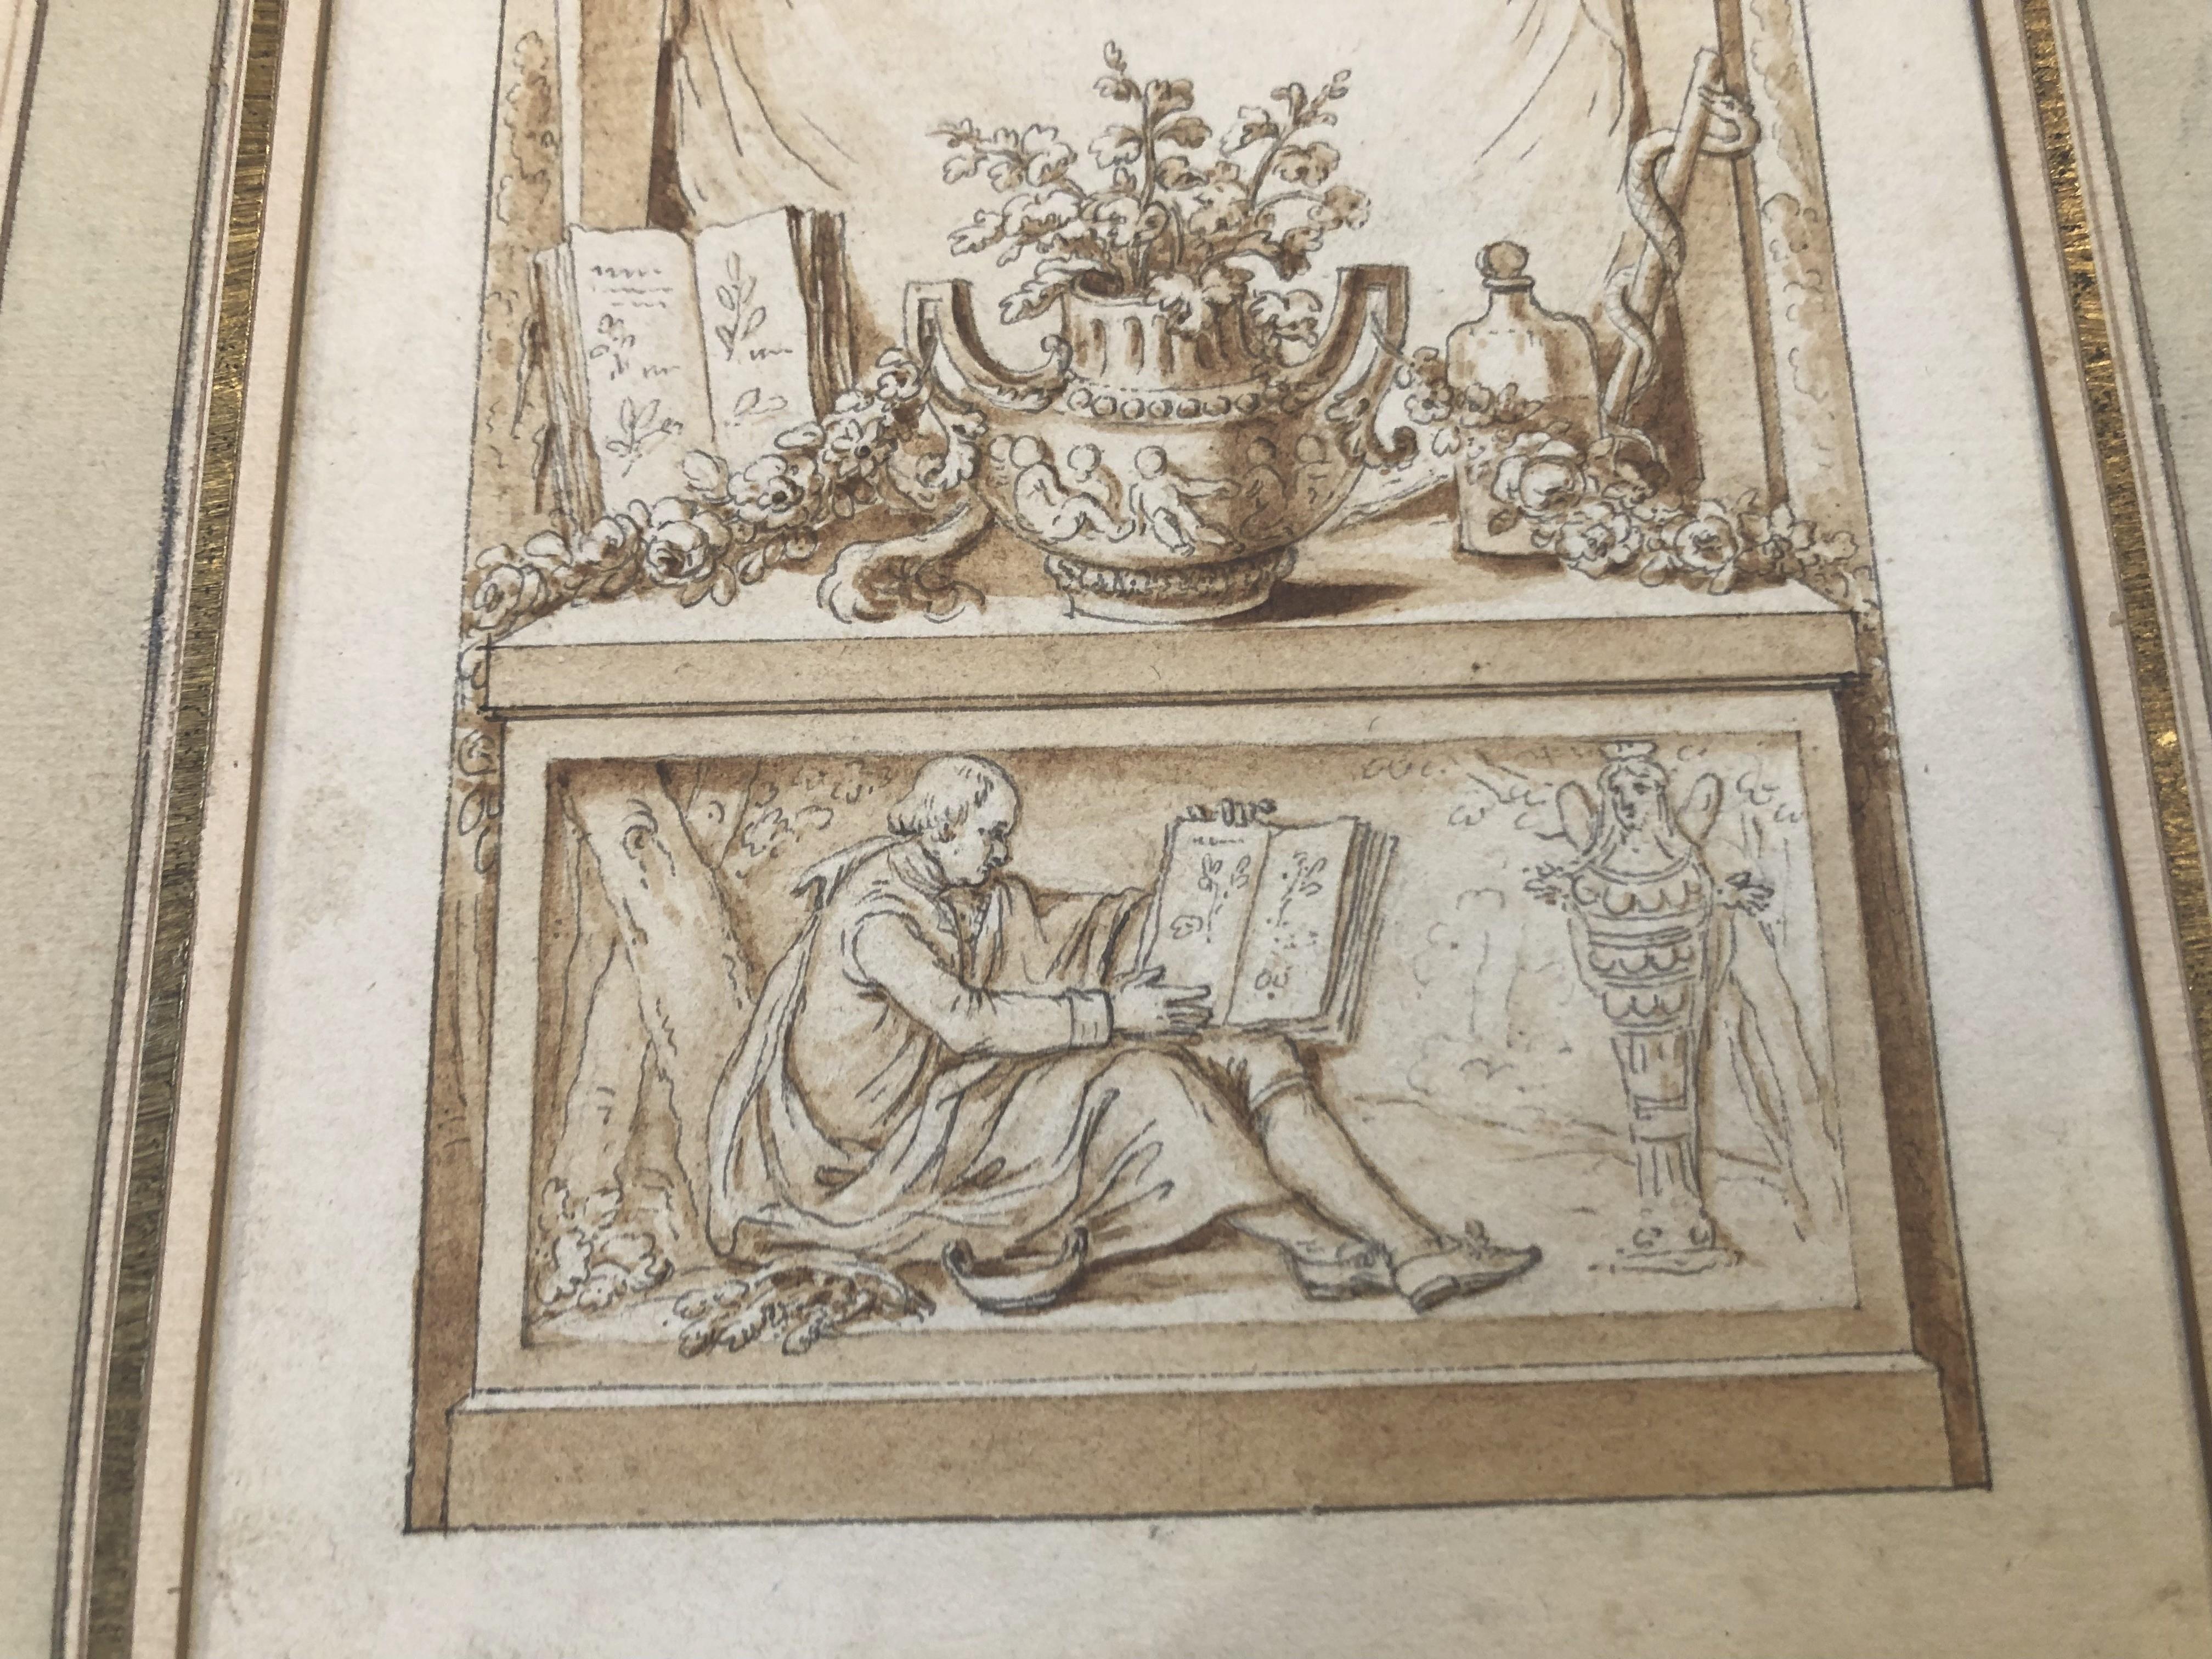 18th century French Neo Classical school,
Study for frontispiece, 
Brown ink and pen, brown ink wash on paper
15,5 x 11 cm, 13 x 8.5 cm for the main motive
Framed : 27 x 21 cm

This drawing is full of details related to medicine, such as the